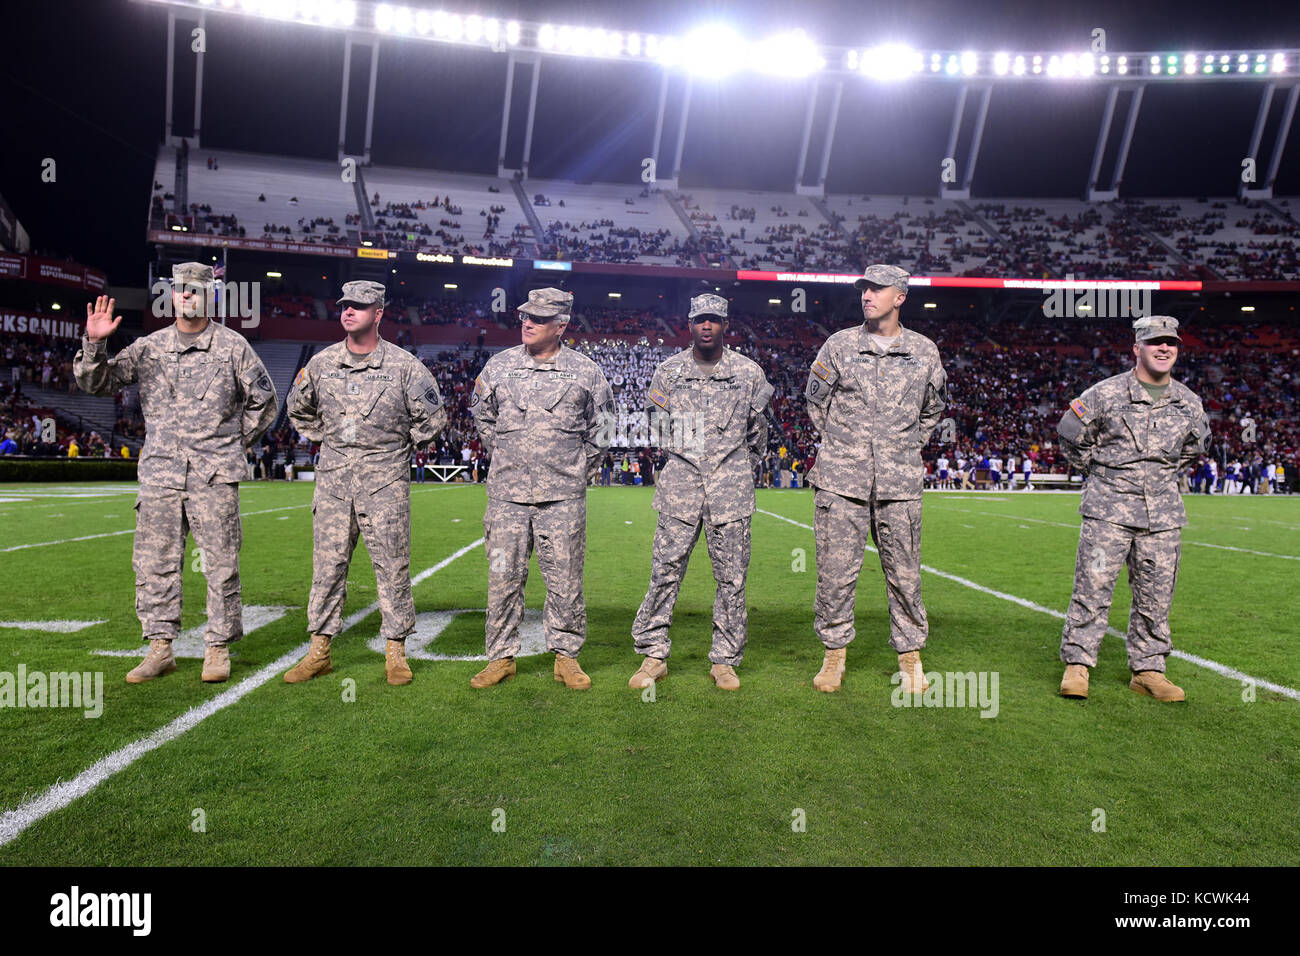 U.S. Army Chief Warrant Officer 3 Joel Gooch, South Carolina National Guard, 1-151st Attack Reconnaissance Battalion UH-64 Apache pilot, receives recognition at Williams-Brice stadium in Columbia, South Carolina, Nov. 19, 2016. The South Carolina Army National Guard conducted a fly-over in support of Fort Jackson's participation in the University of South Carolina's military appreciation game. (U.S. Air National Guard photo by Airman 1st Class Megan Floyd) Stock Photo